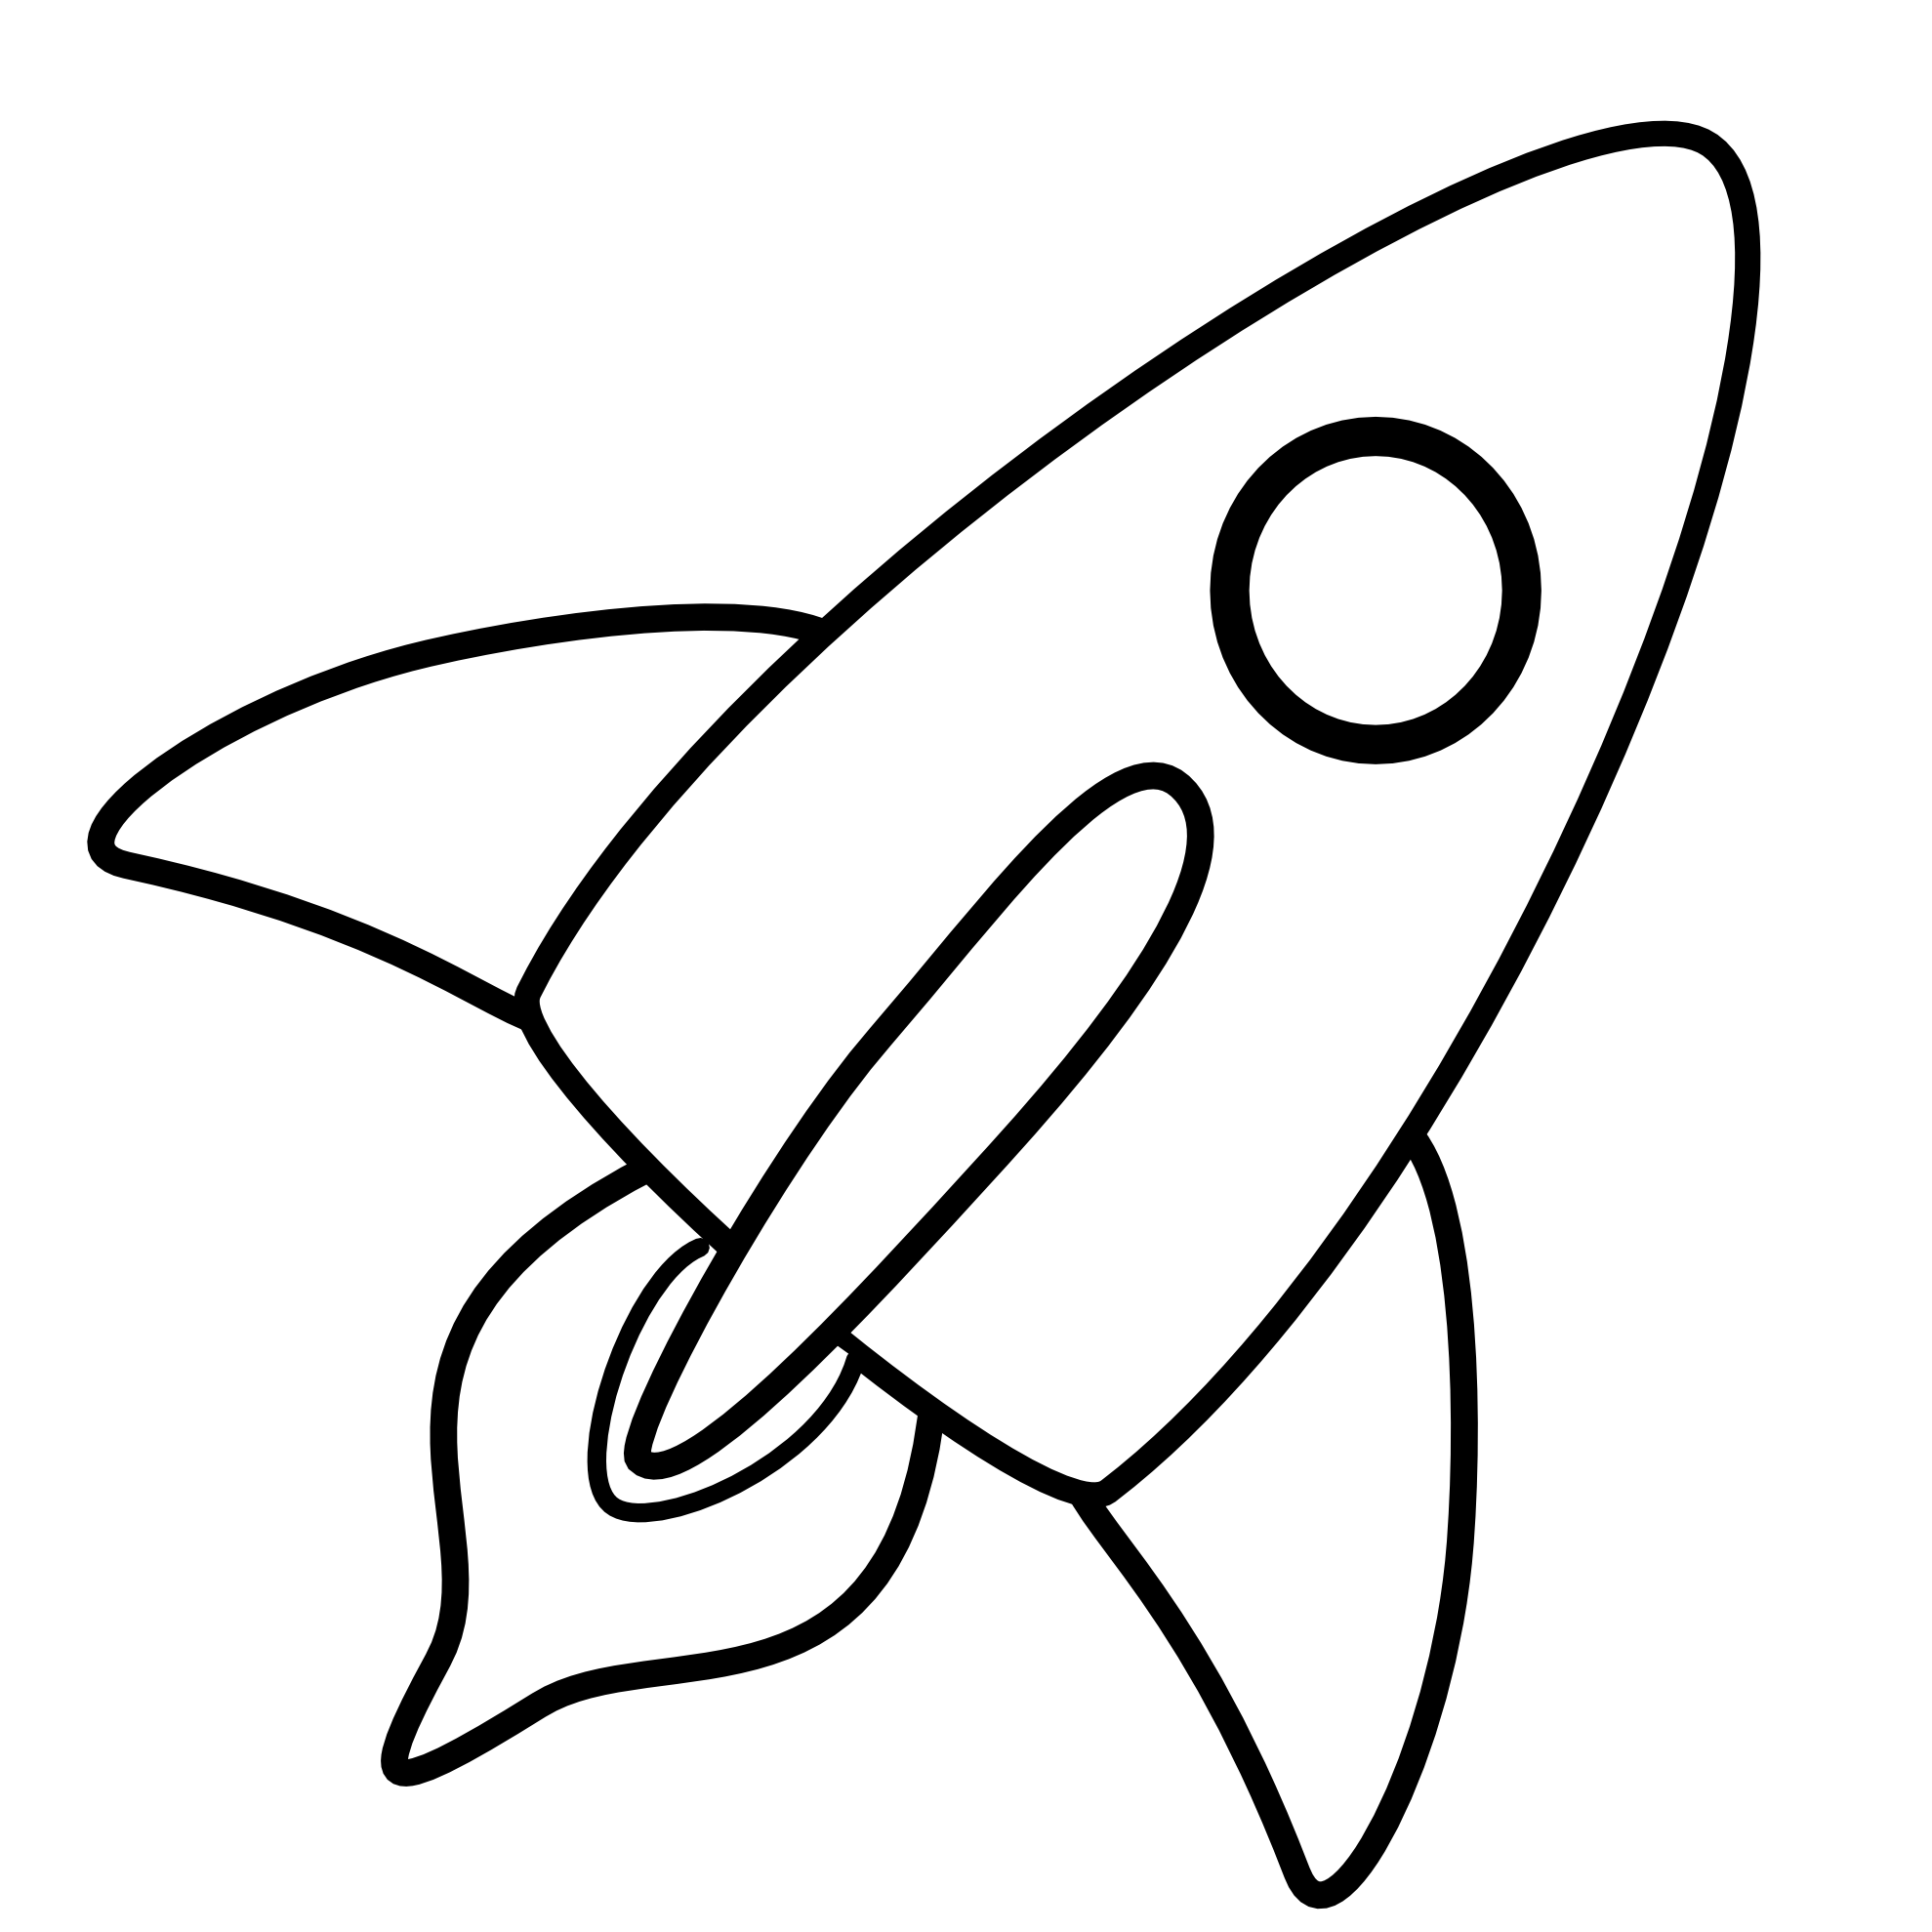 Rocket black and white clipart 3